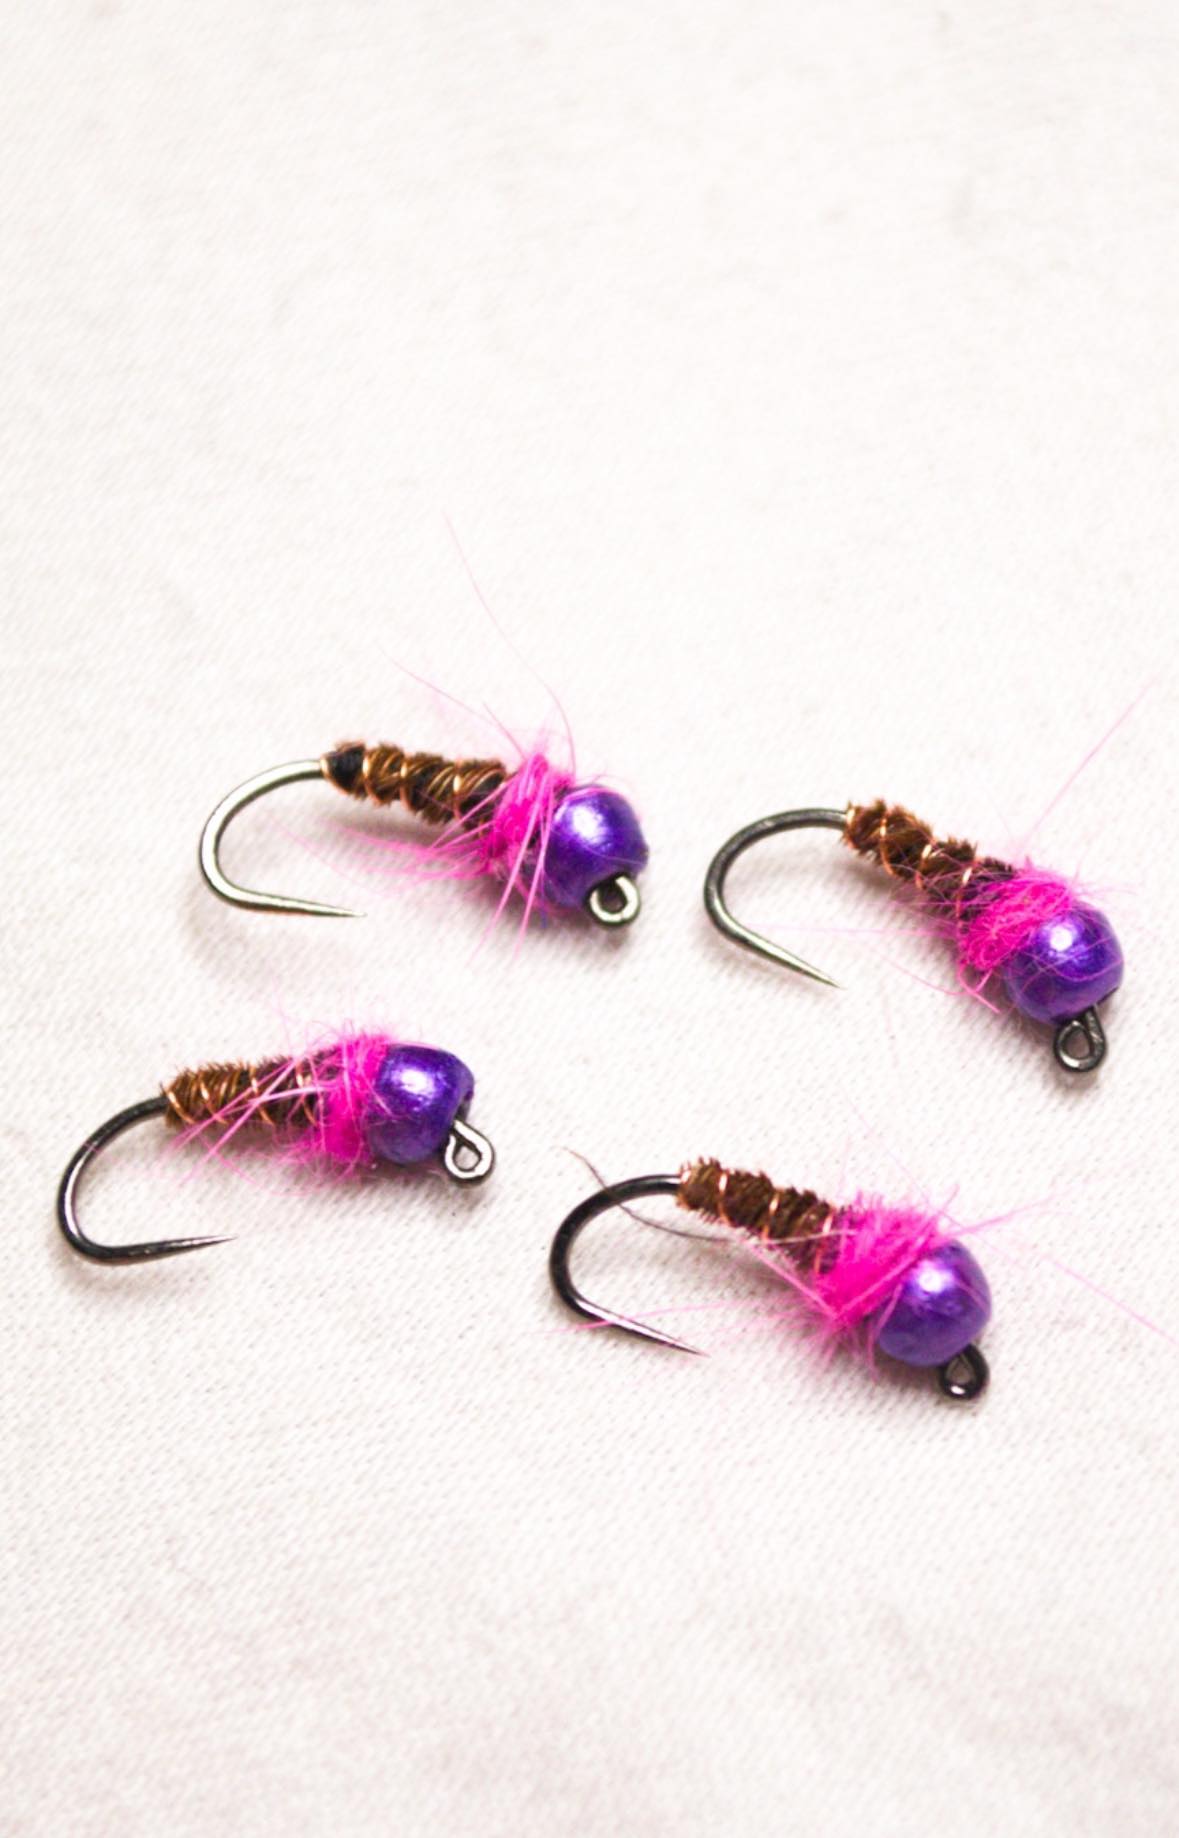 China F13801 barbless fly fishing jig nymphs manufacturers and suppliers